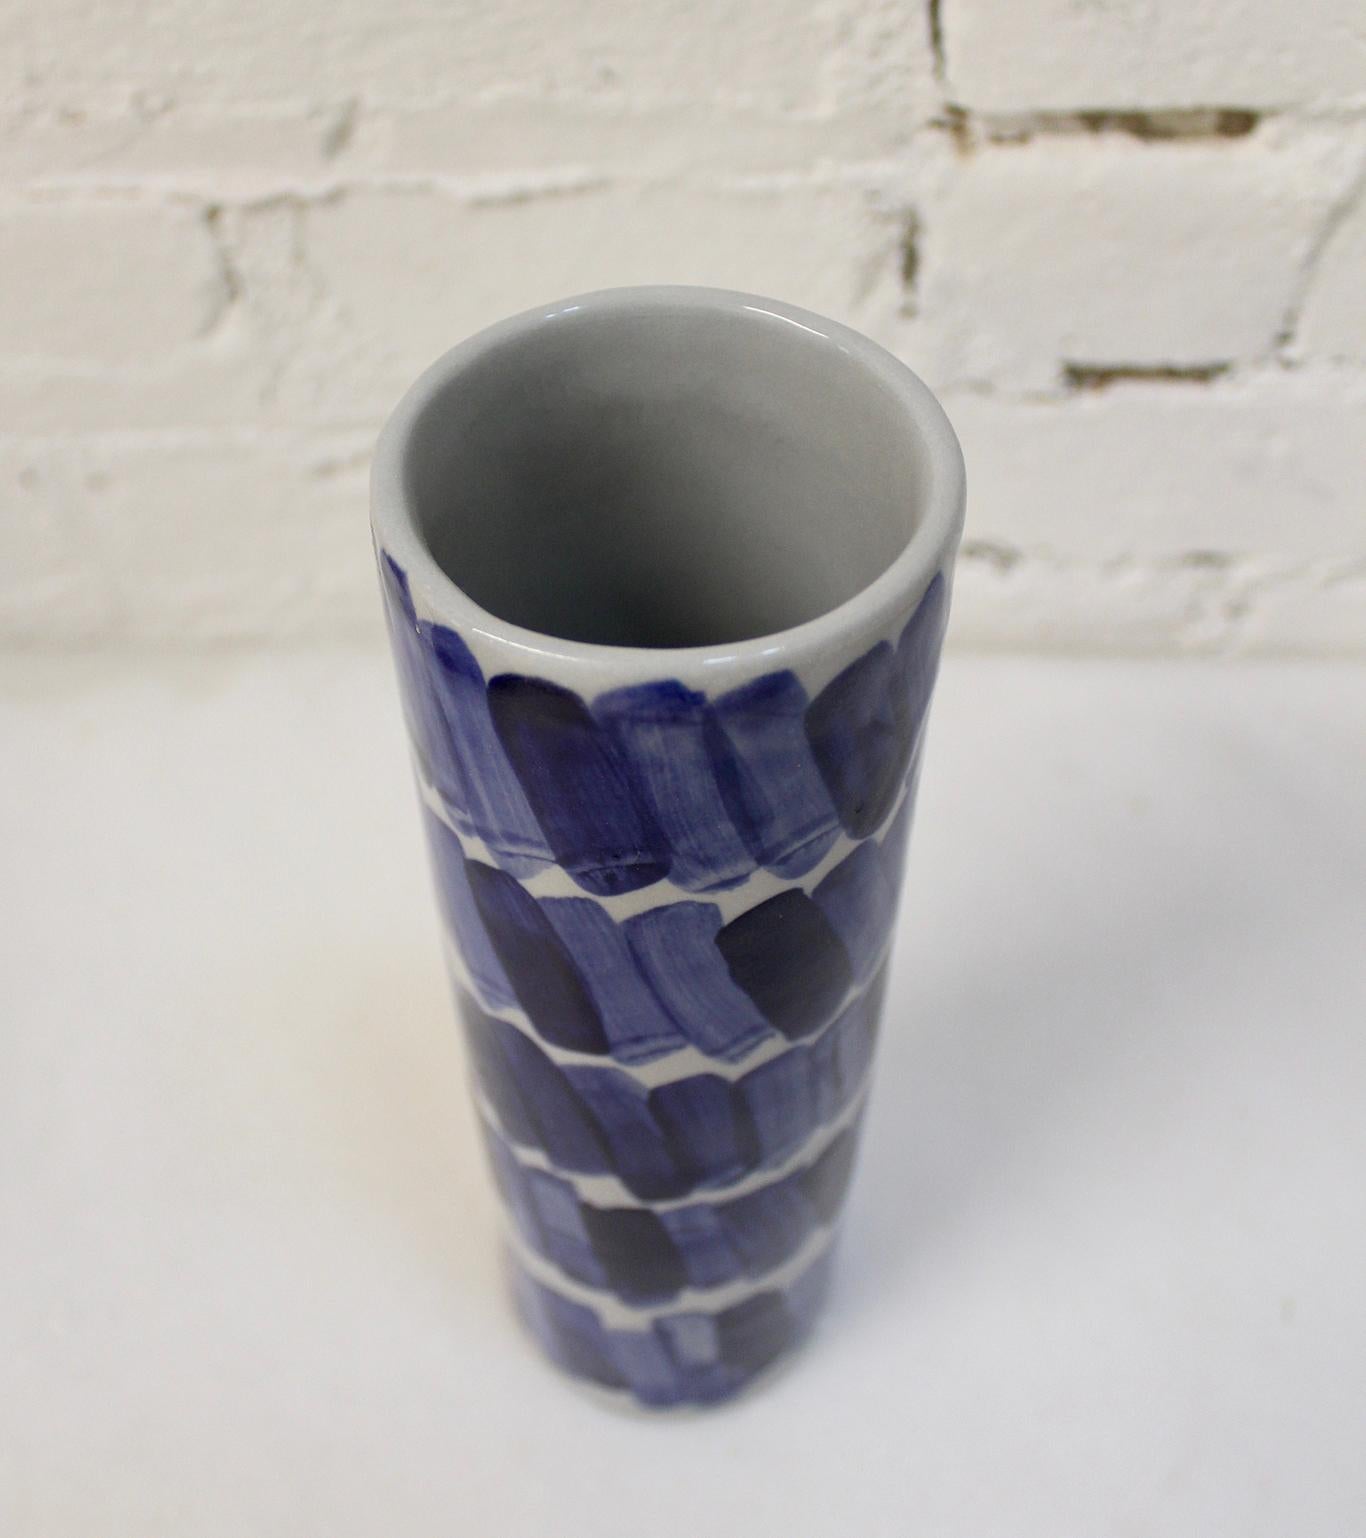 Hand-built porcelain vase by Isabel Halley, in hand-dyed pale grey with striking cobalt glaze brush strokes.

Dimensions: 8